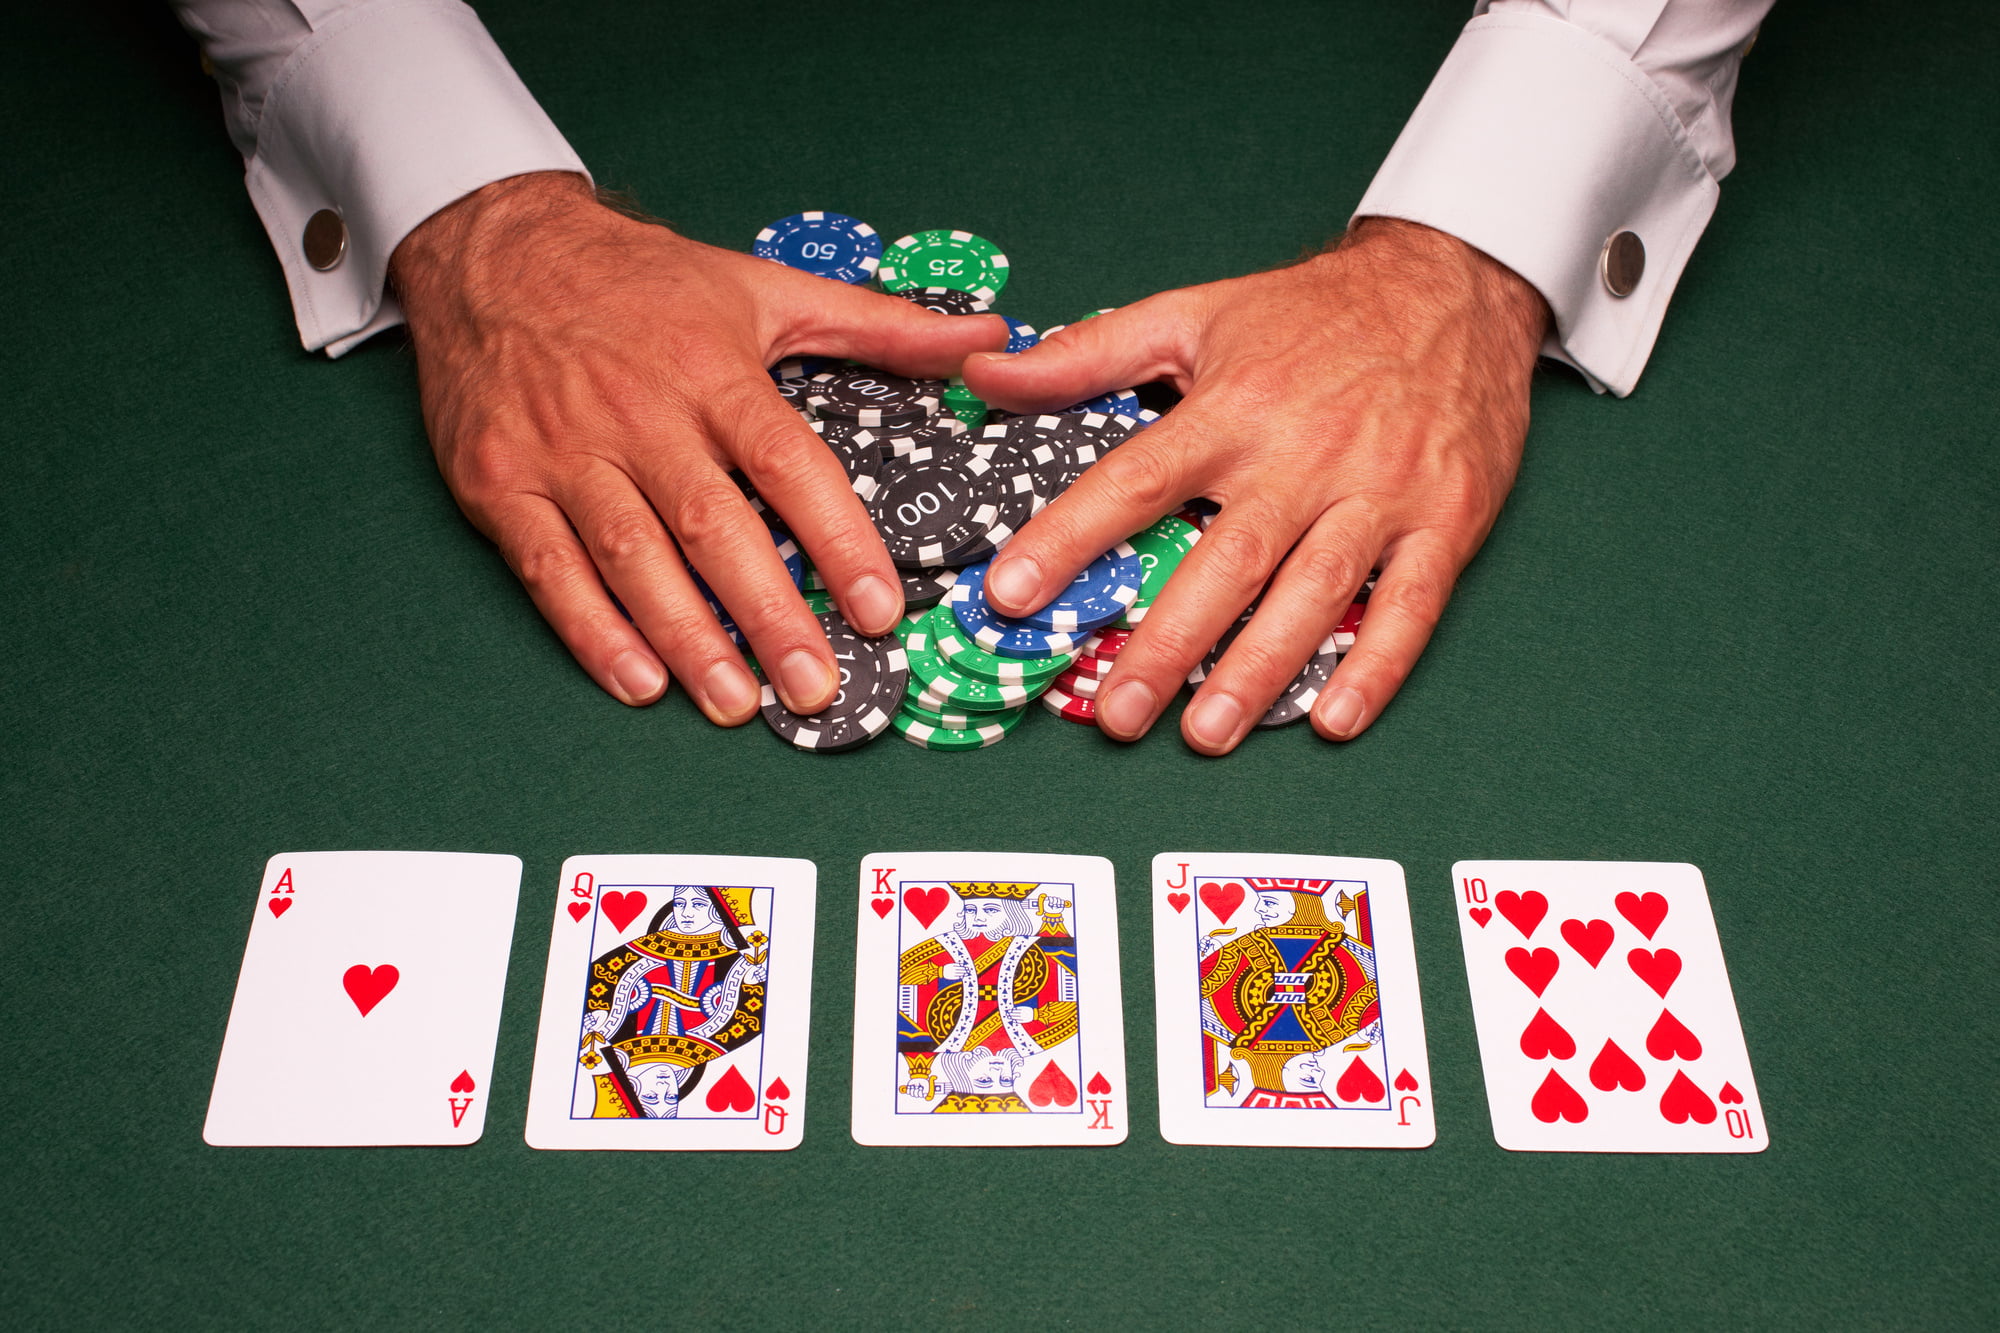 If you want to become a professional gambler, there are several things you need to know and do. These tips will help get you started.